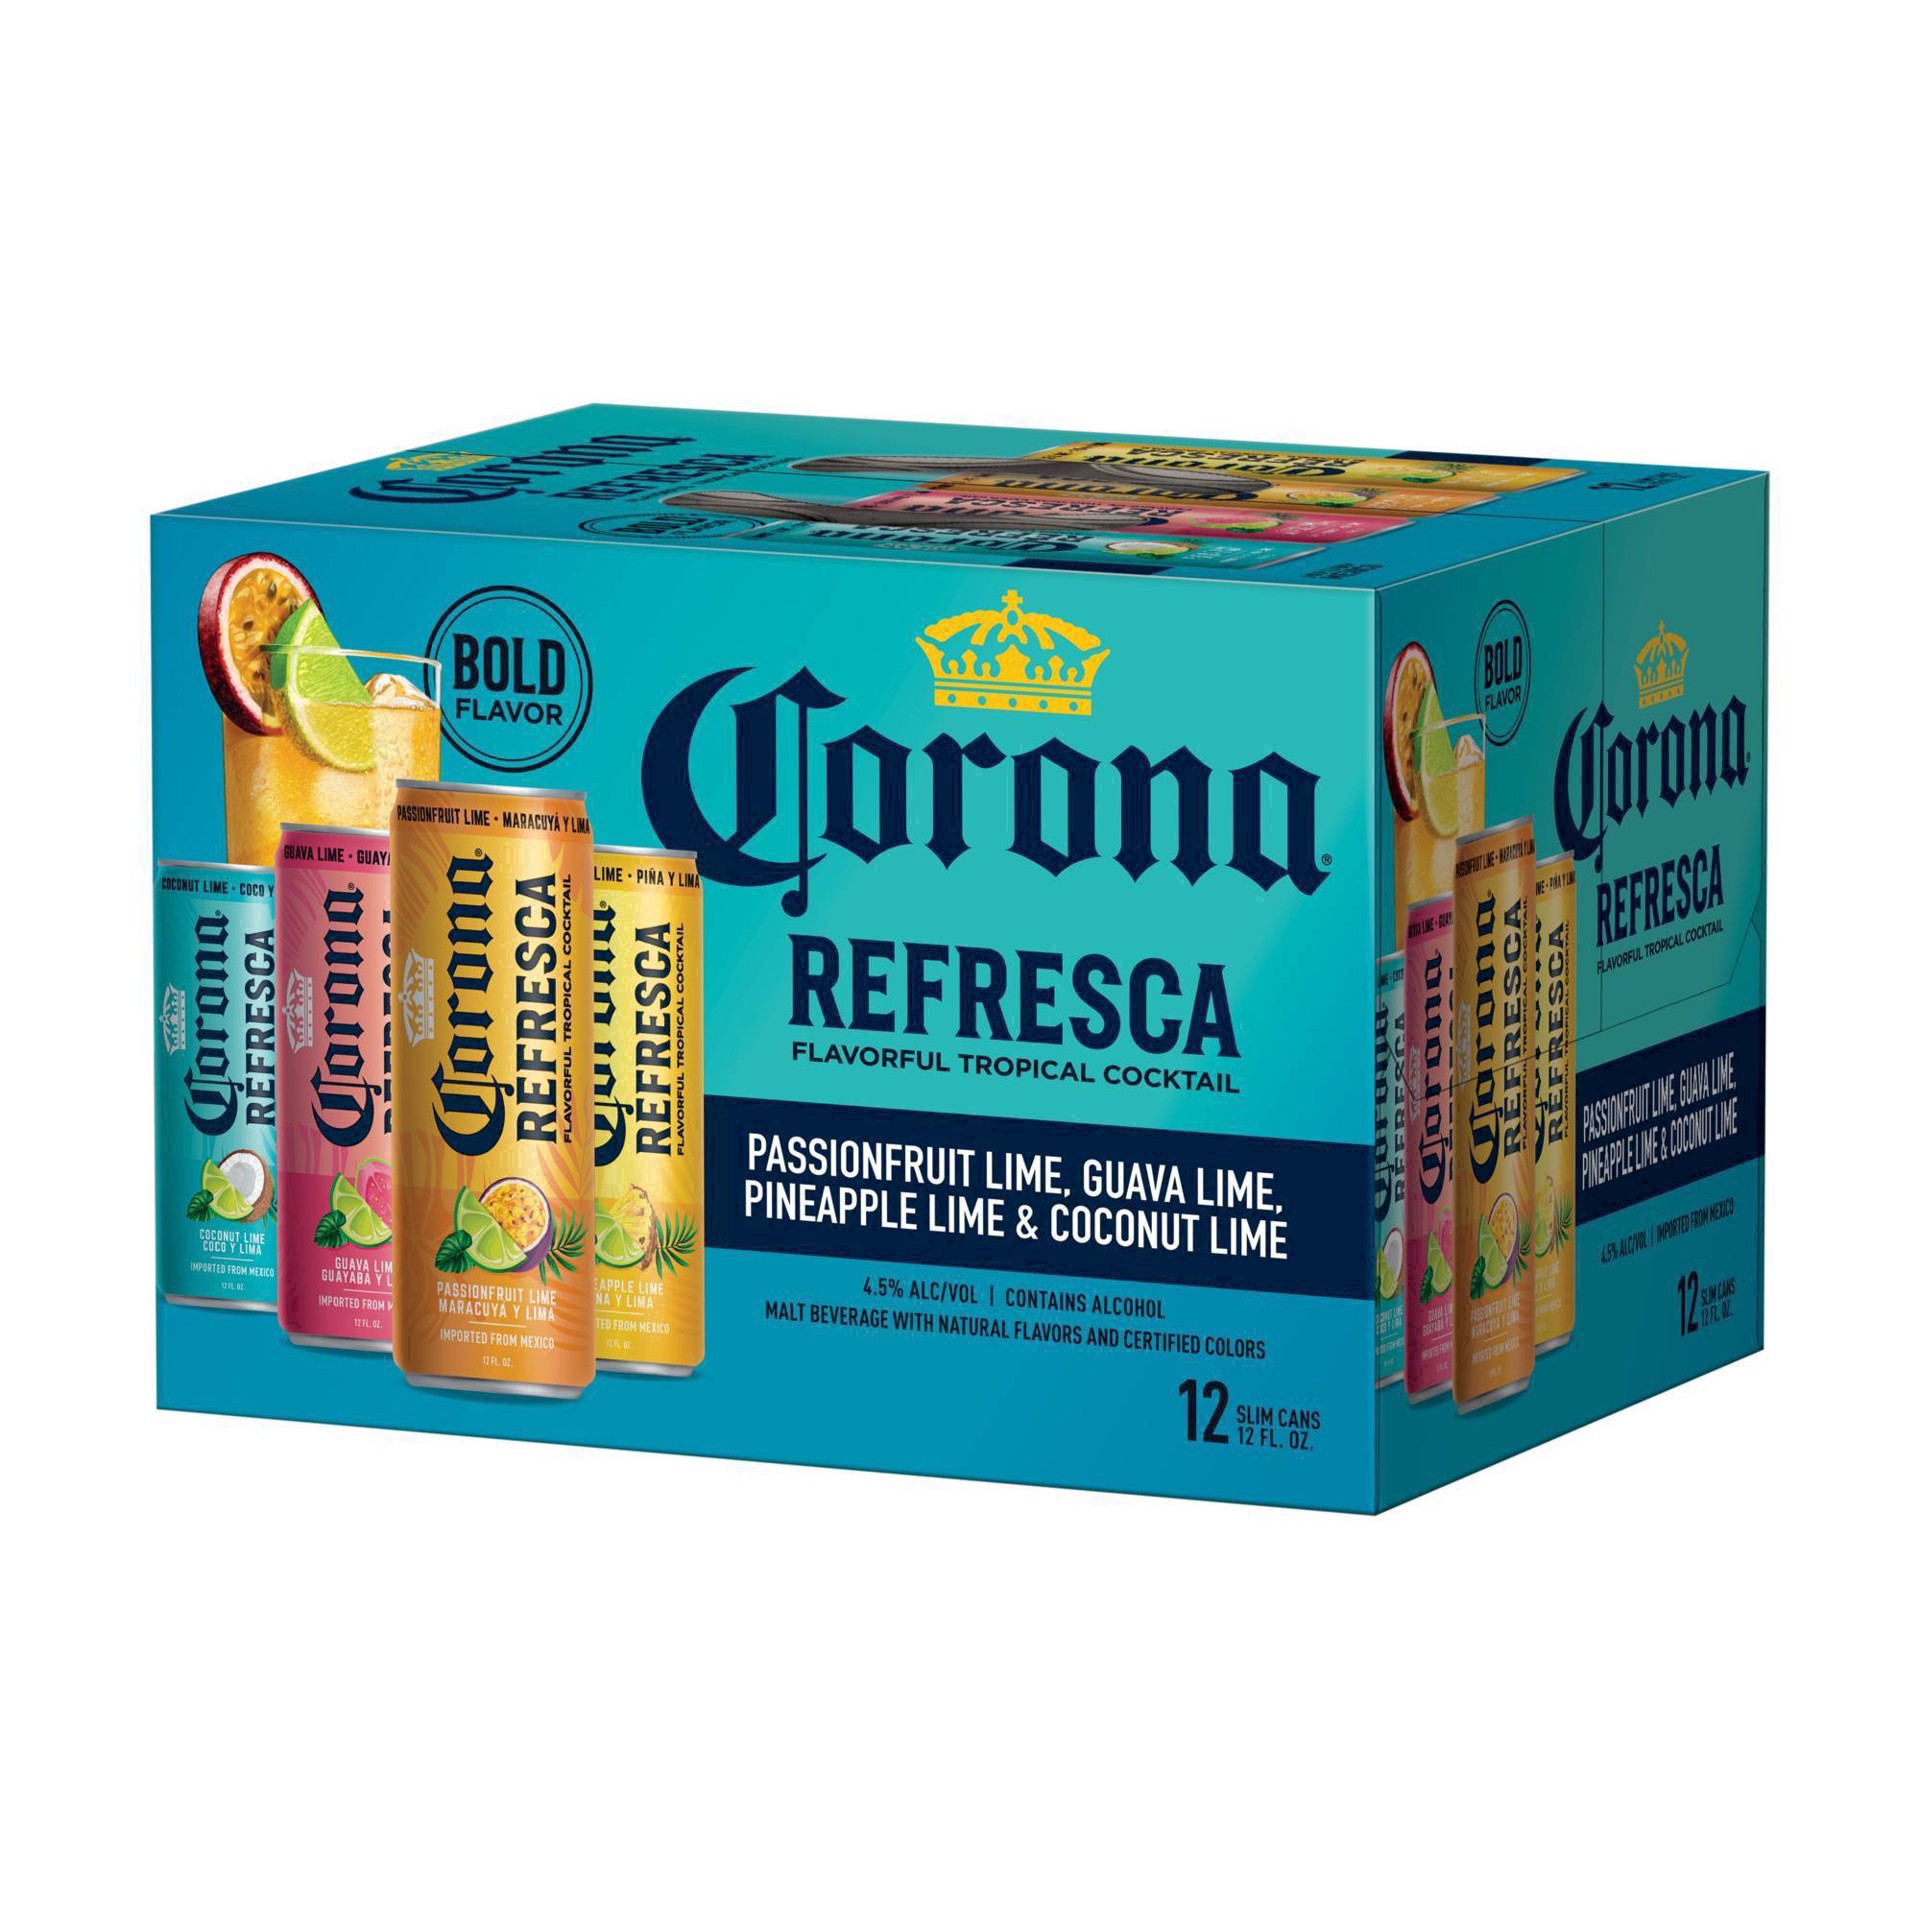 slide 47 of 113, Corona Refresca Hard Tropical Punch Variety Pack Cans, 144 fl oz